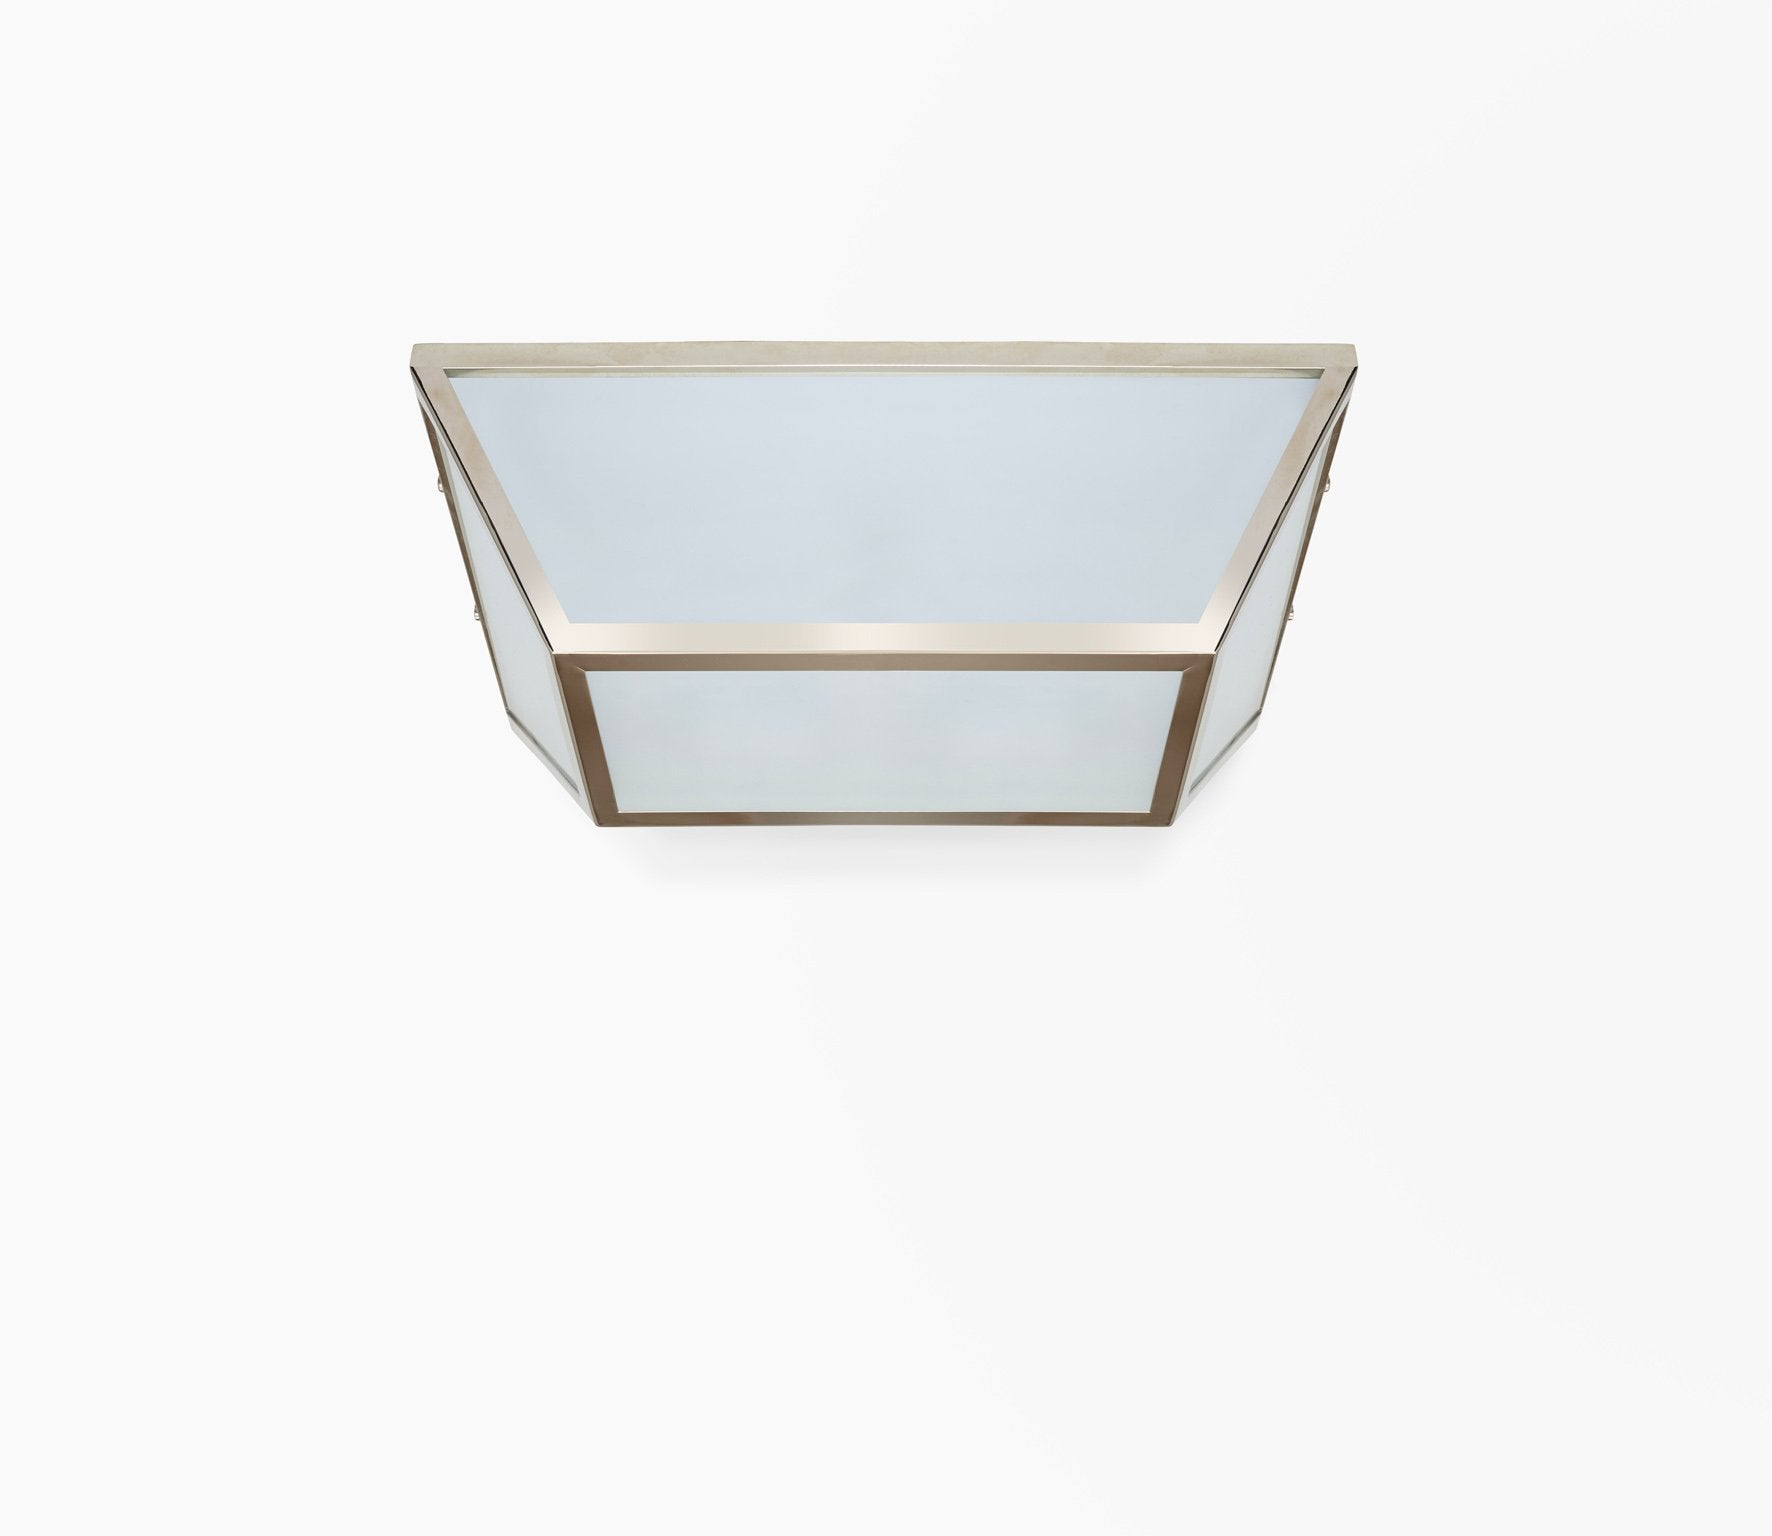 Strand Ceiling Light Product Image 1